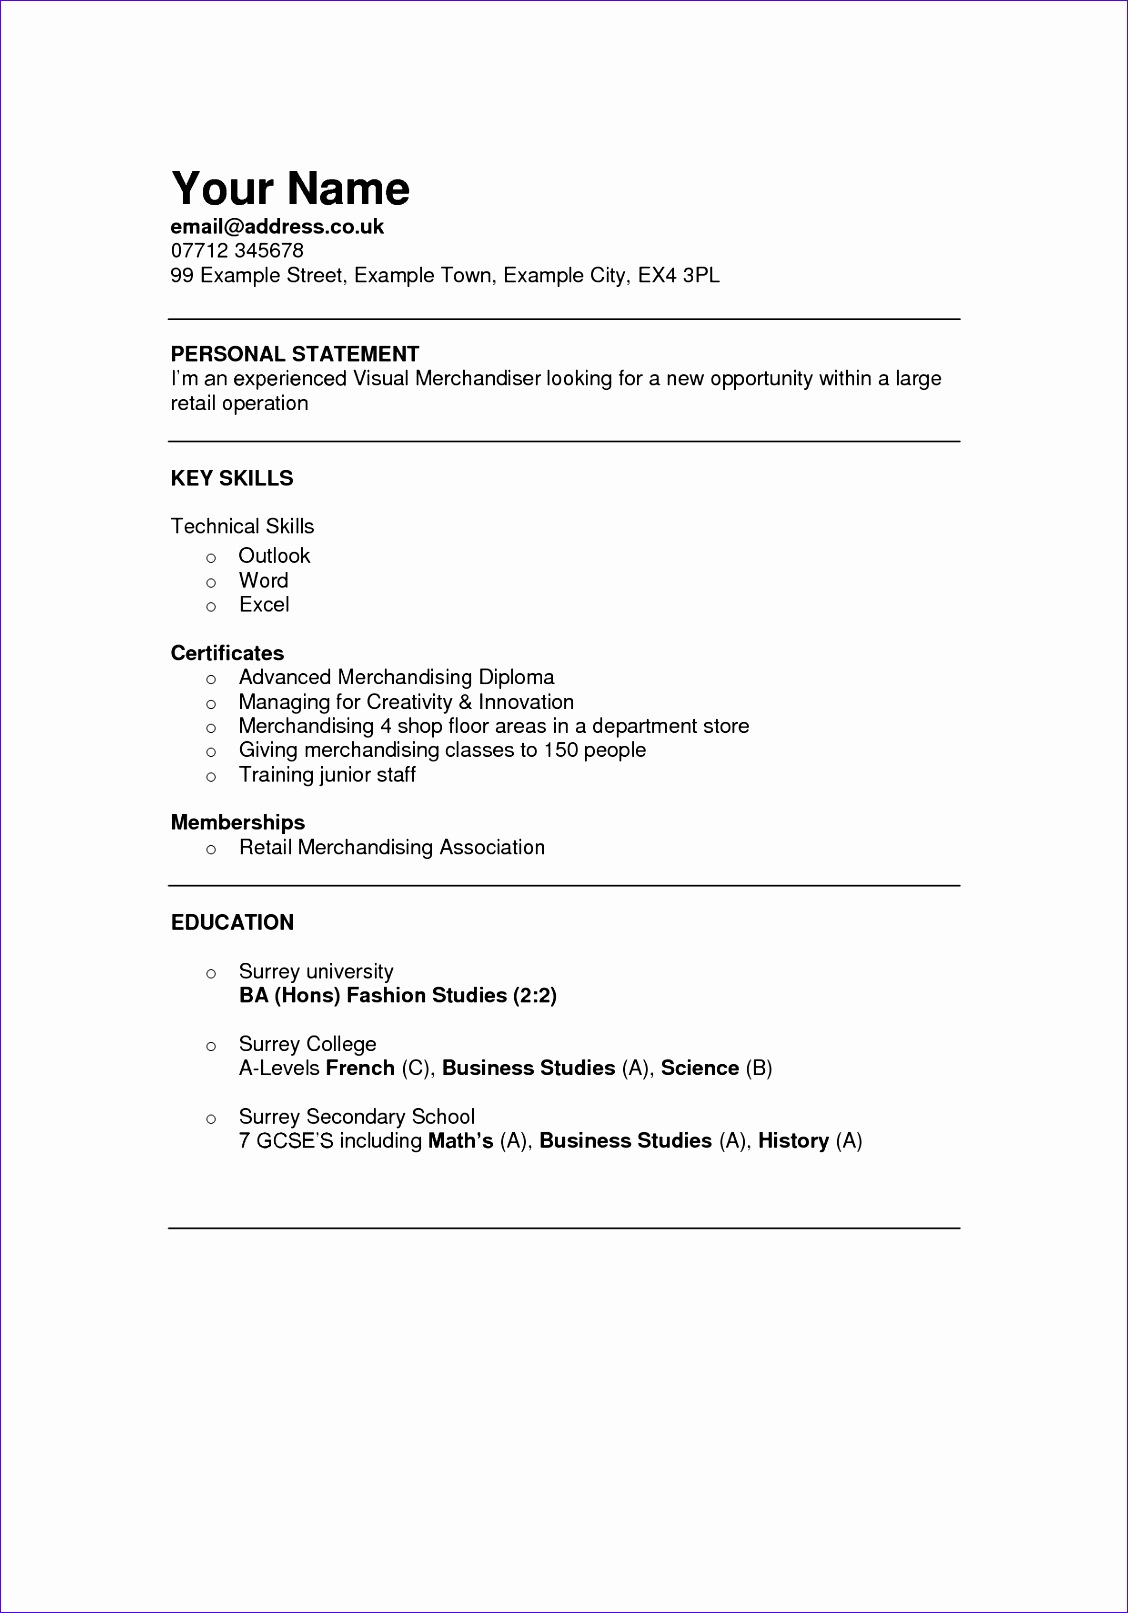 resume templates free resume template free and templates for resume templates microsoft word 2010